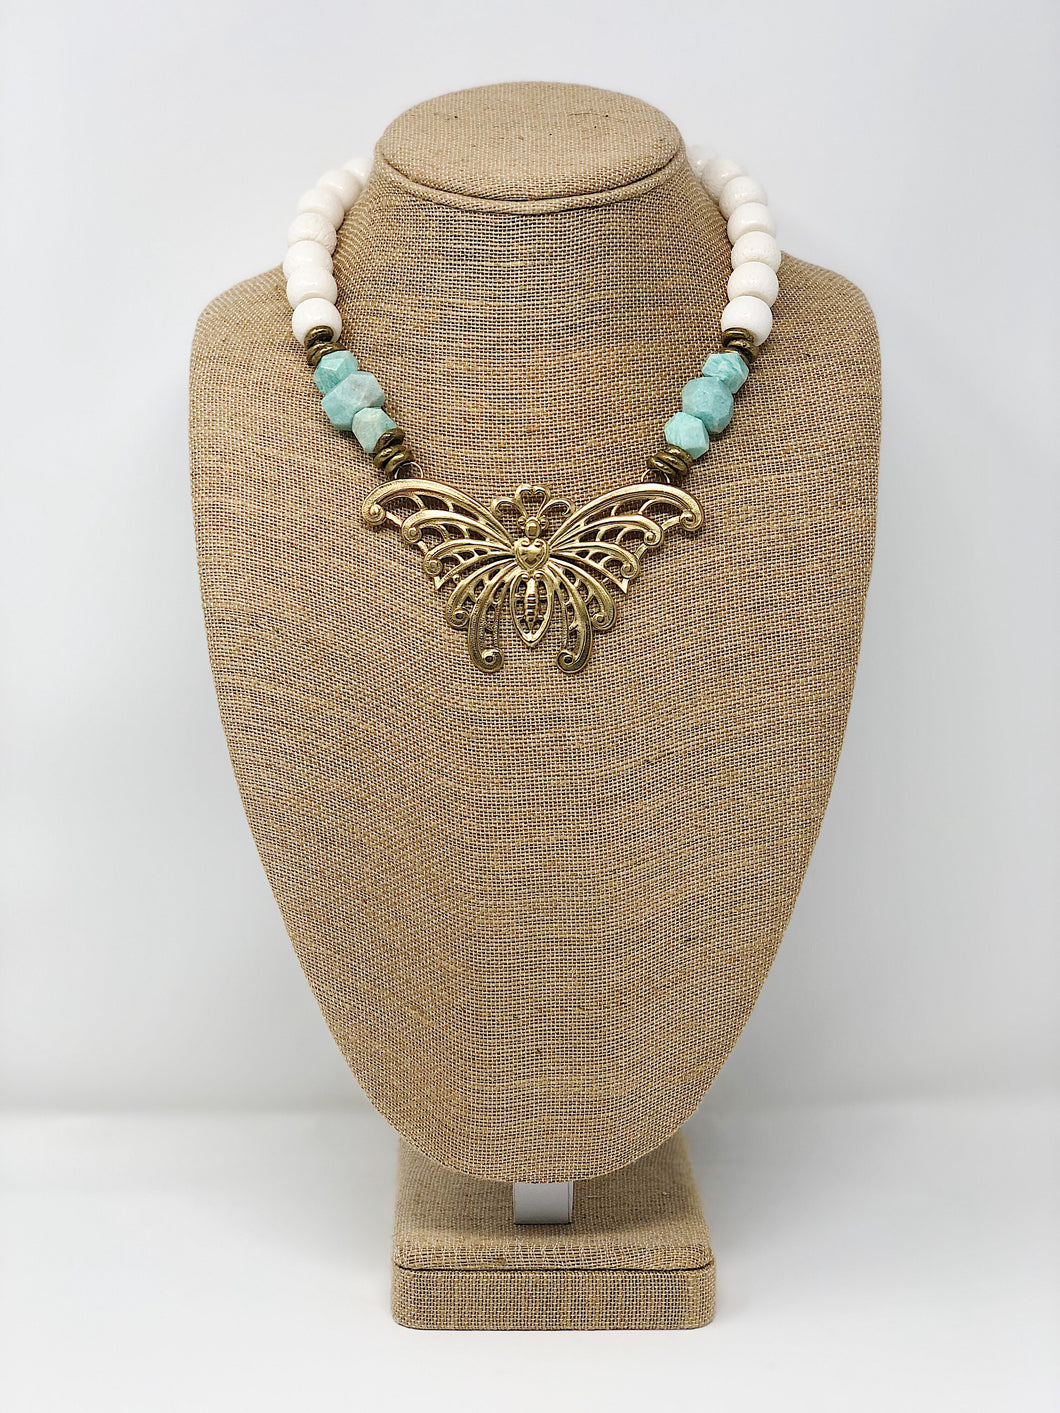 Coral necklace with Butterfly pendant